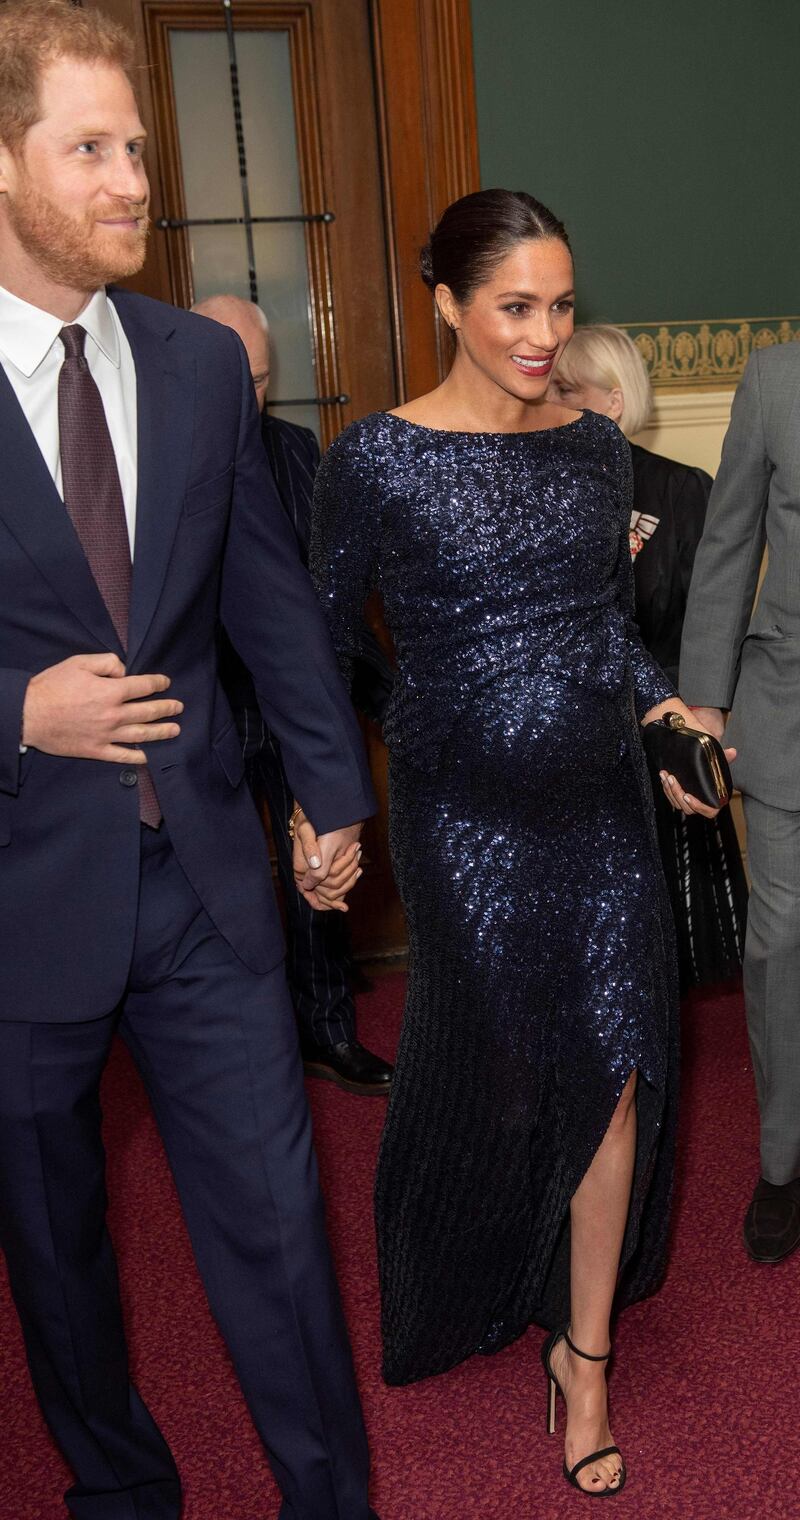 Meghan, Duchess of Sussex, wears a Roland Mouret gown and Stuart Weitzman heels to the premiere of Cirque du Soleil's 'Totem' at the Royal Albert Hall in London on January 16, 2019.  AFP